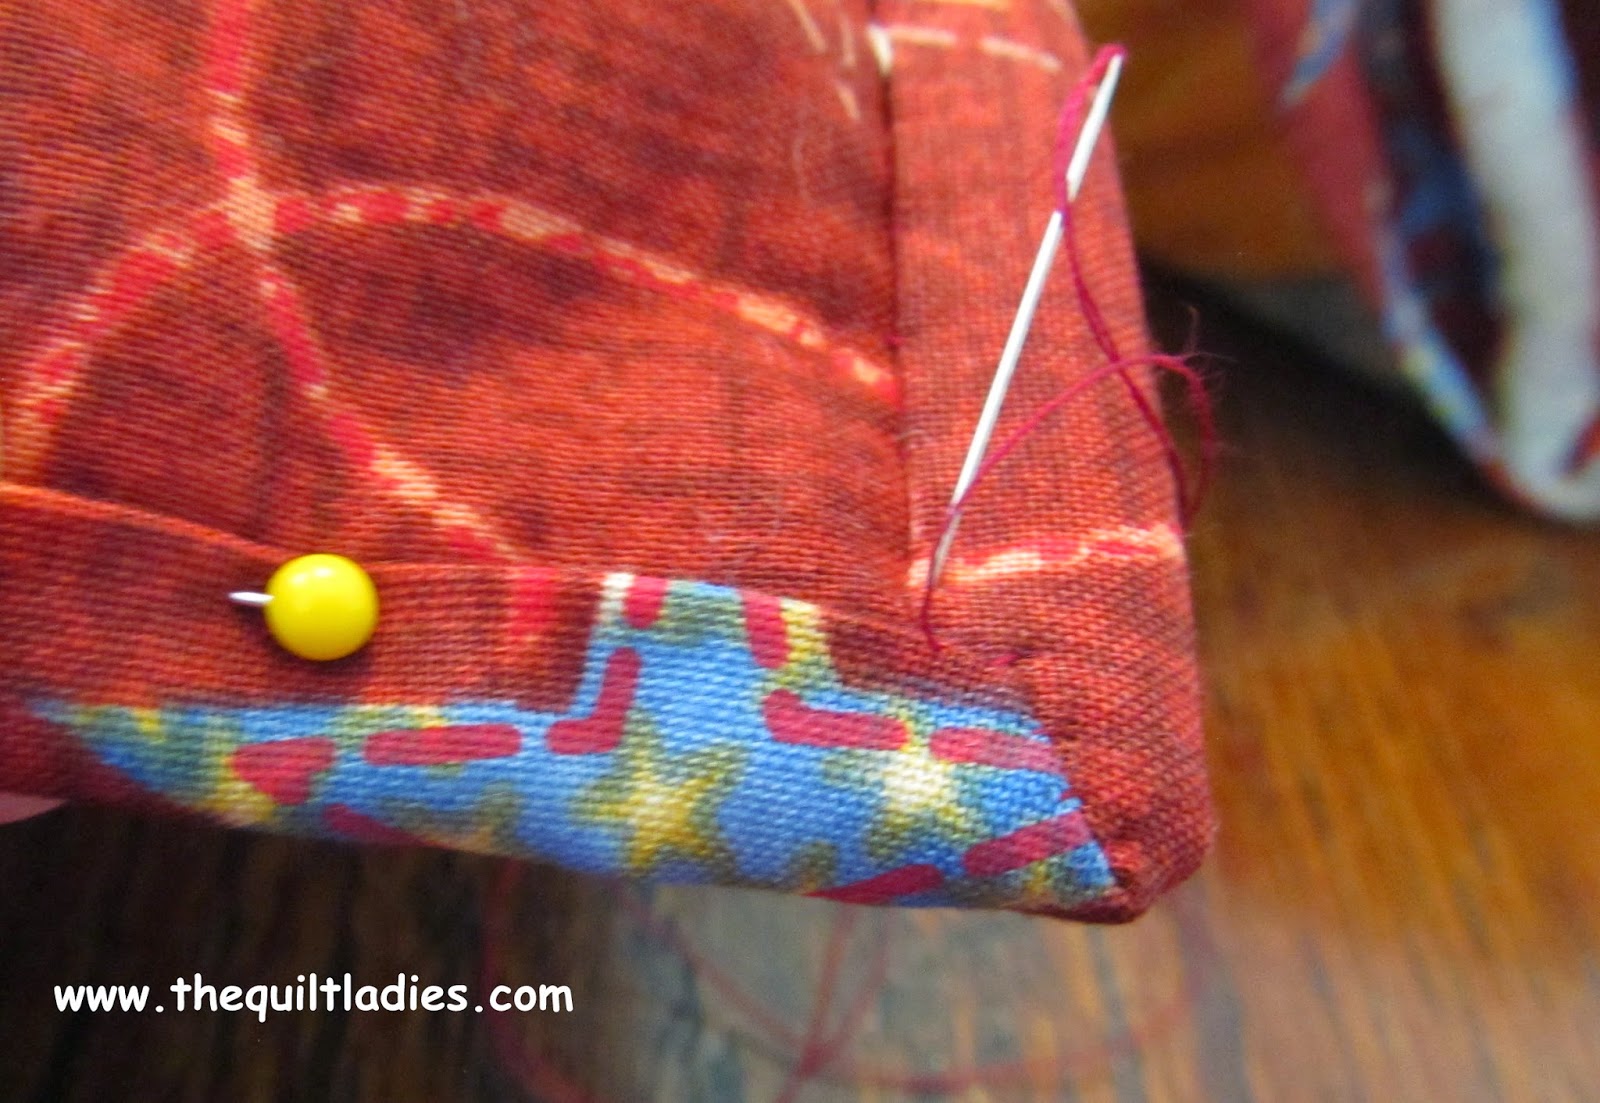 How to make Quilt Binding Tutorial and How to Hand Stitch the Bind